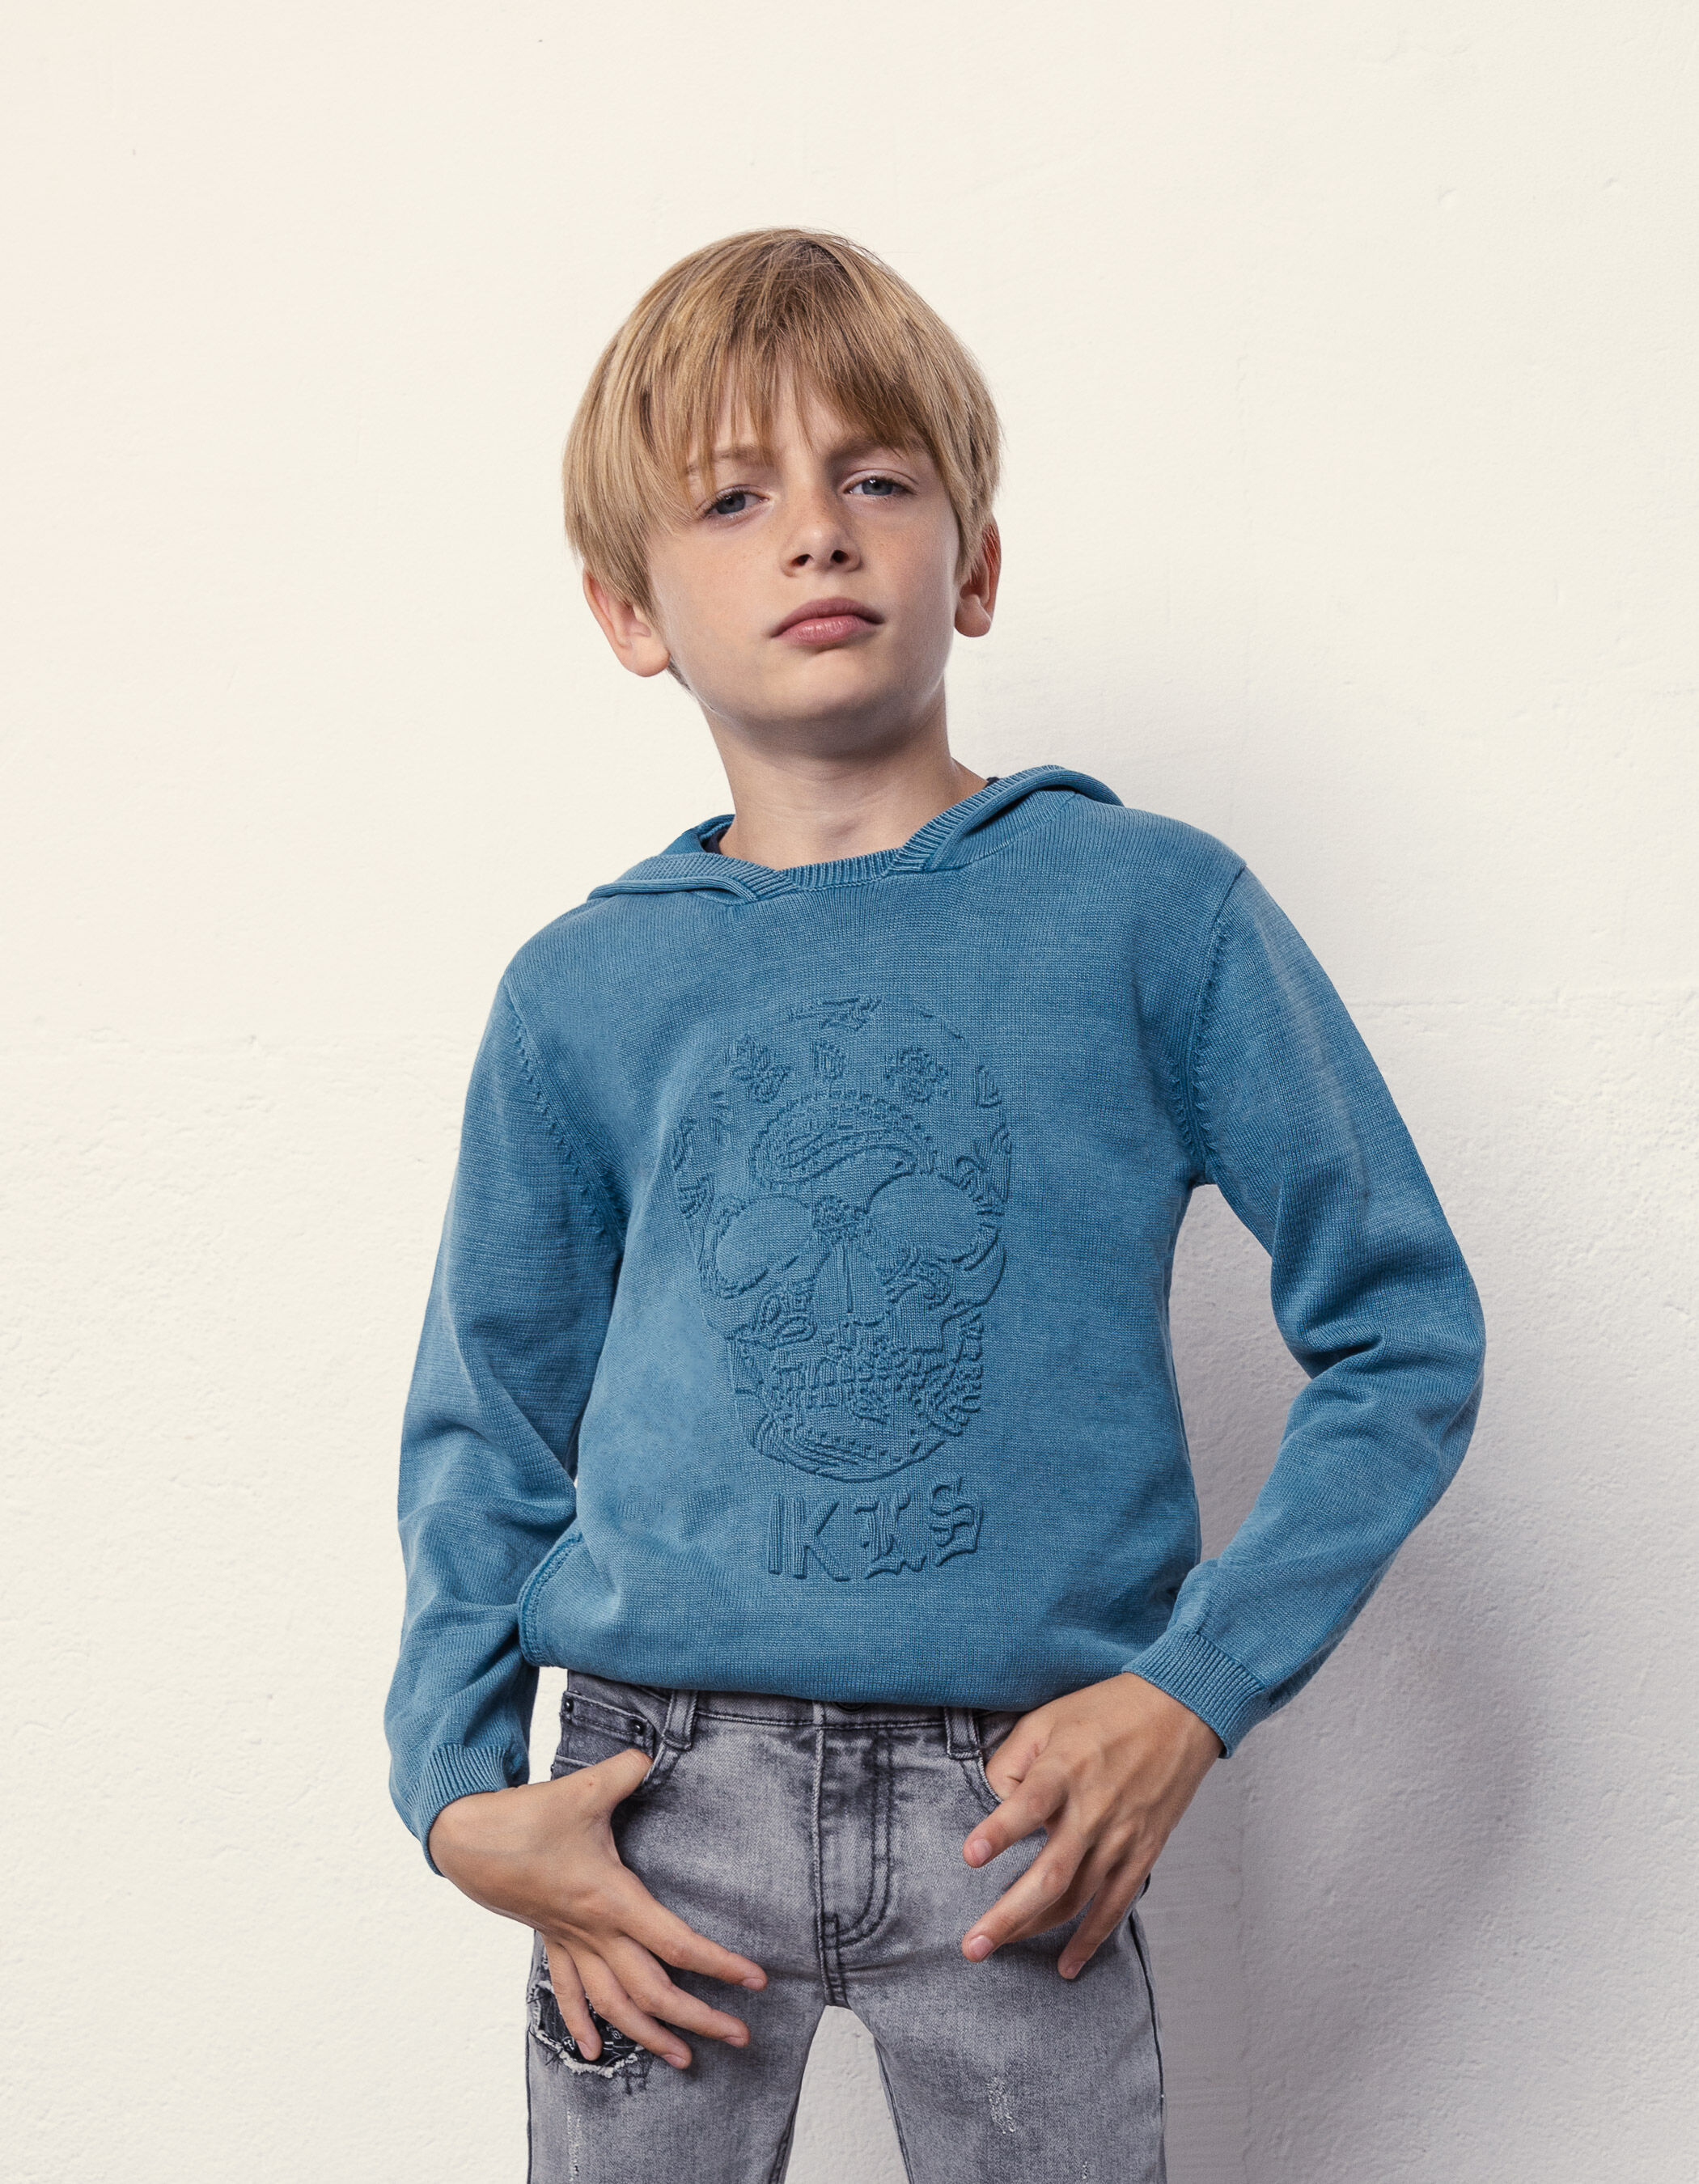 Blue, 110 Baby Boys Sweater Pullover Kids Boys Crew Neck Long Sleeves Sweater Warm Knitwear for Children… 